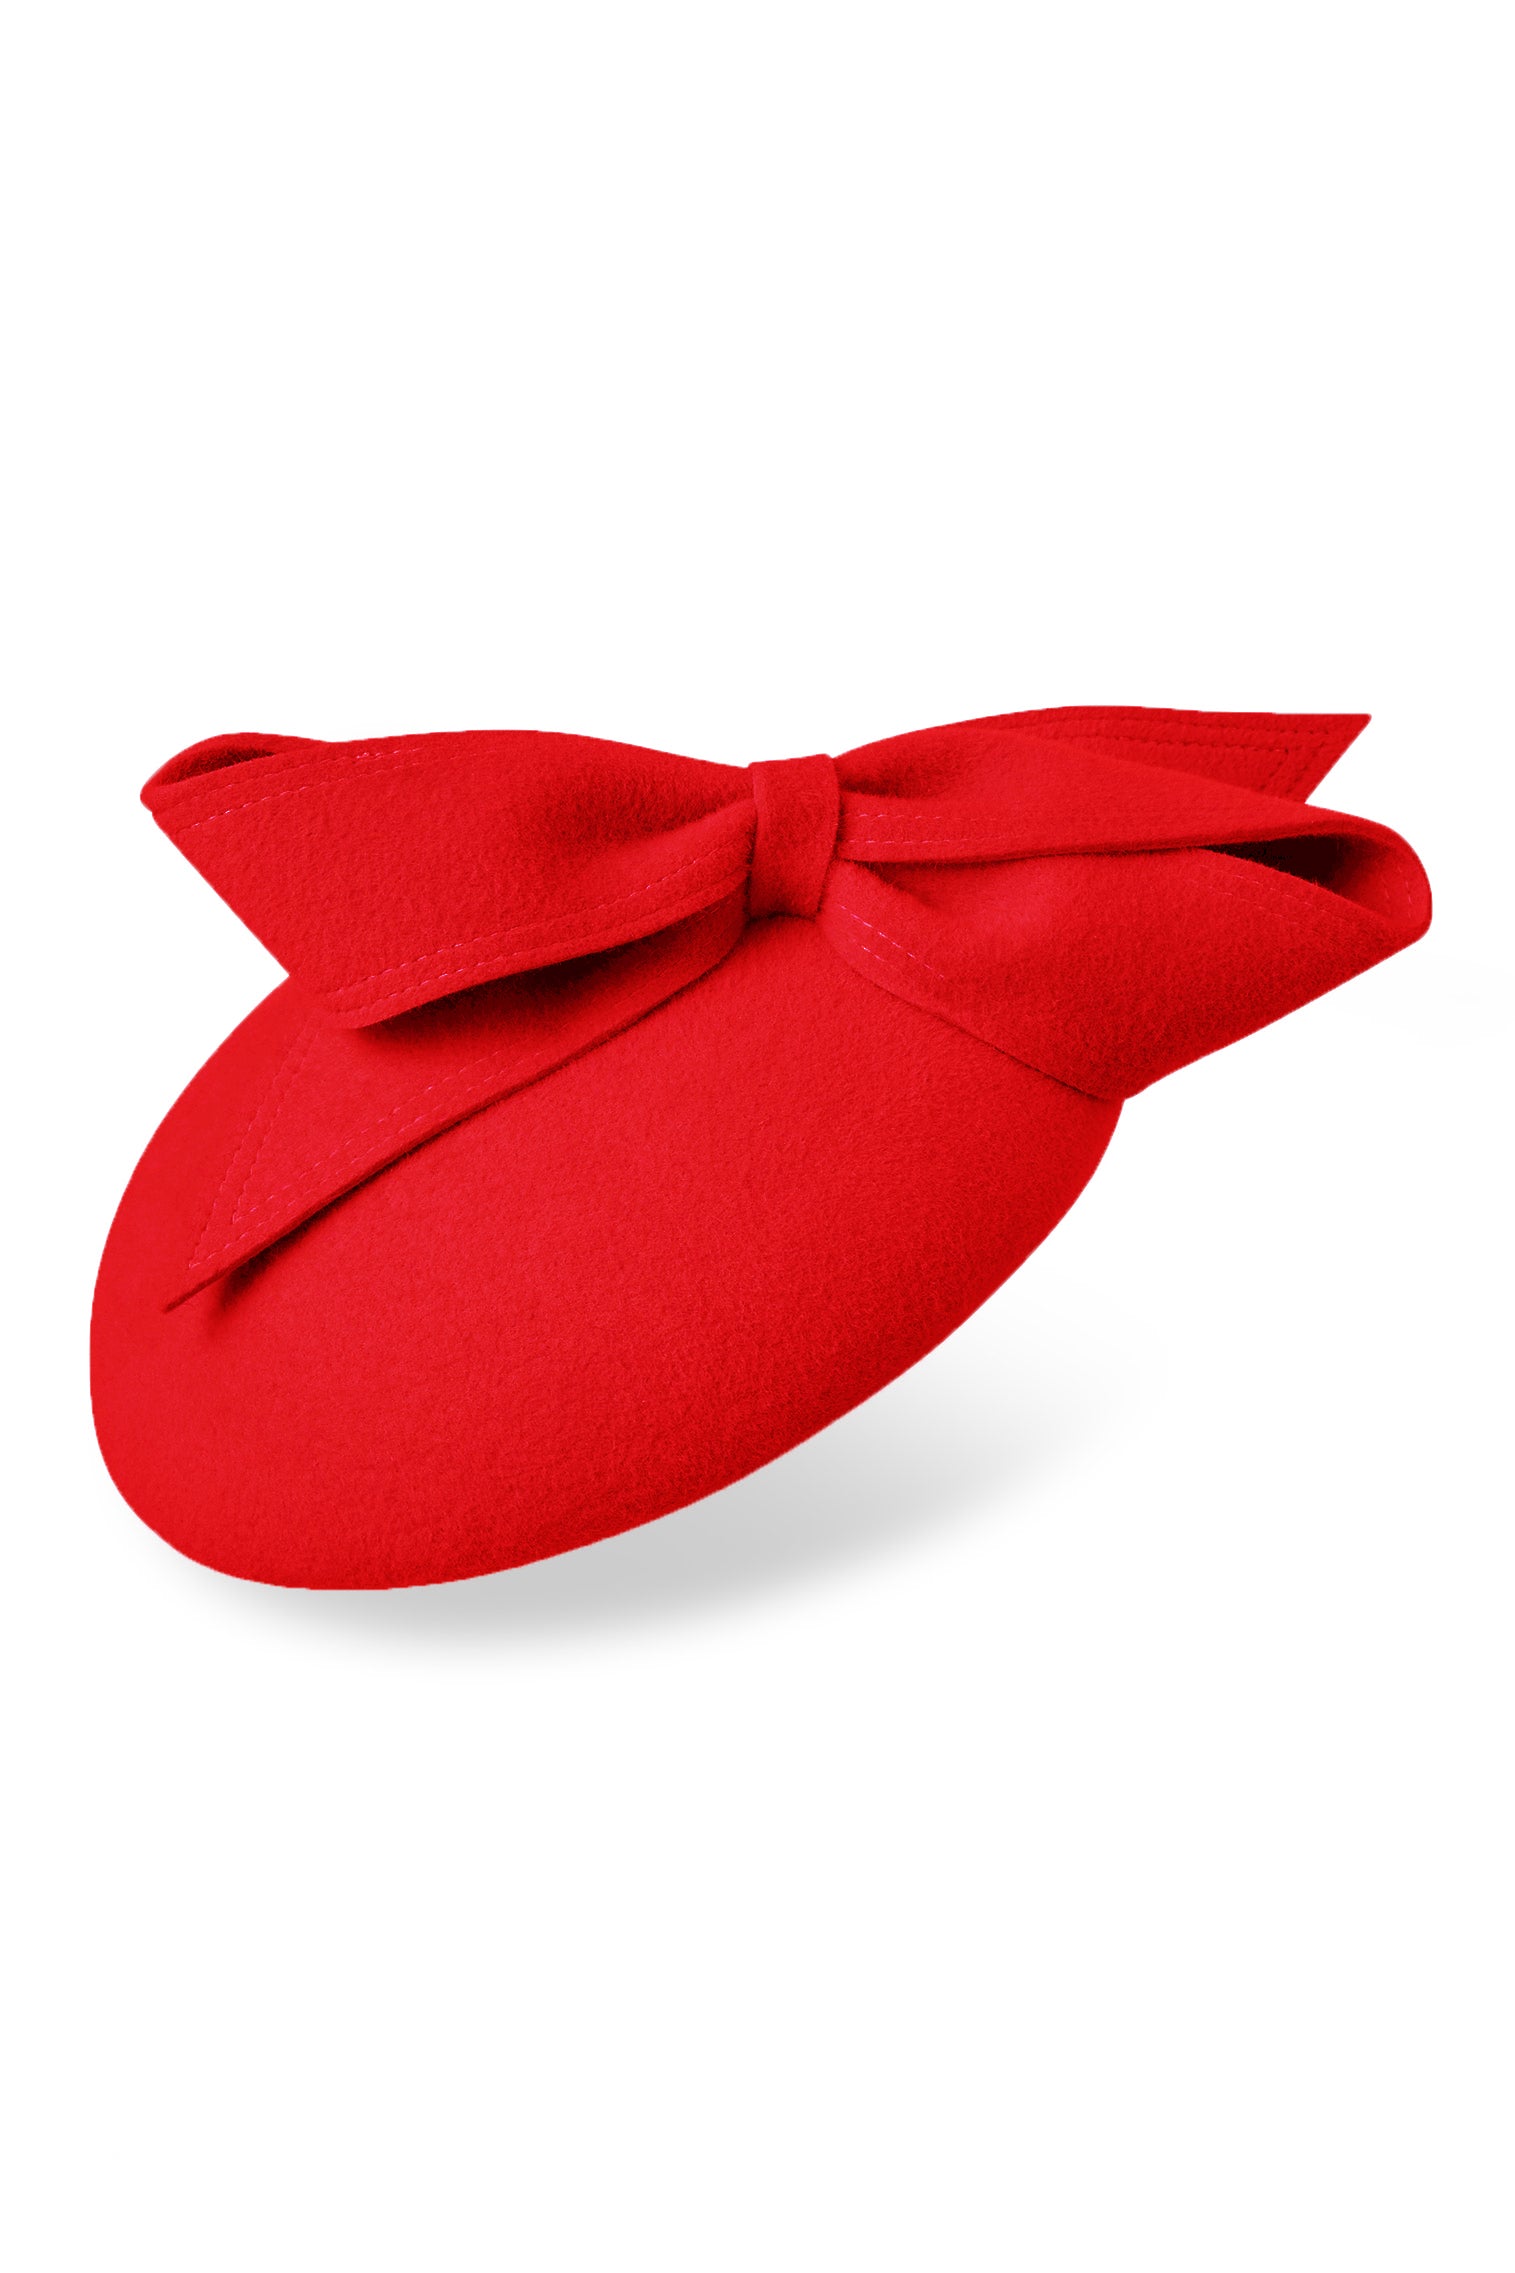 Lana Red Button Hat - Products - Lock & Co. Hatters London UK